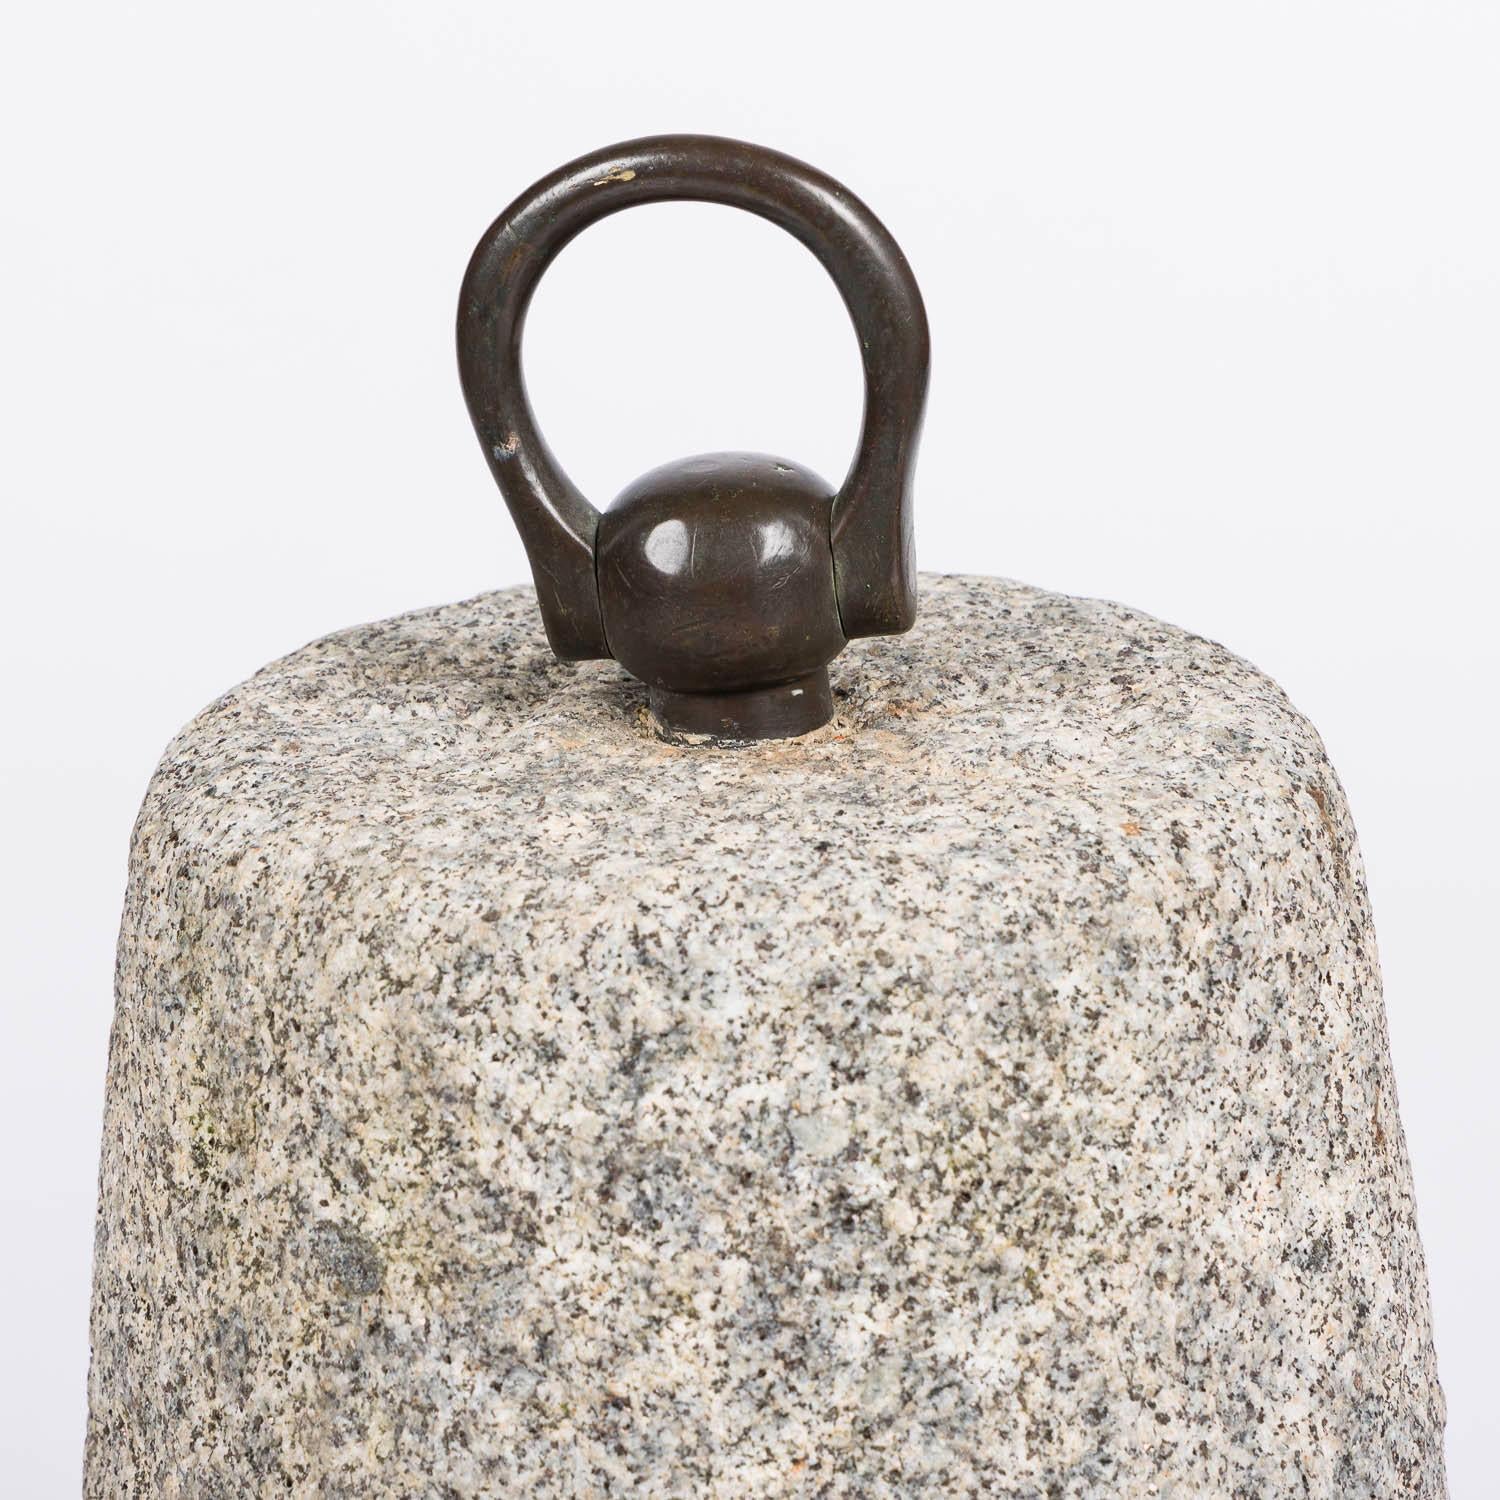 A tether stone hand carved from granite with a bronze loop.

Approx. weight: 40 lbs (20 kilos).